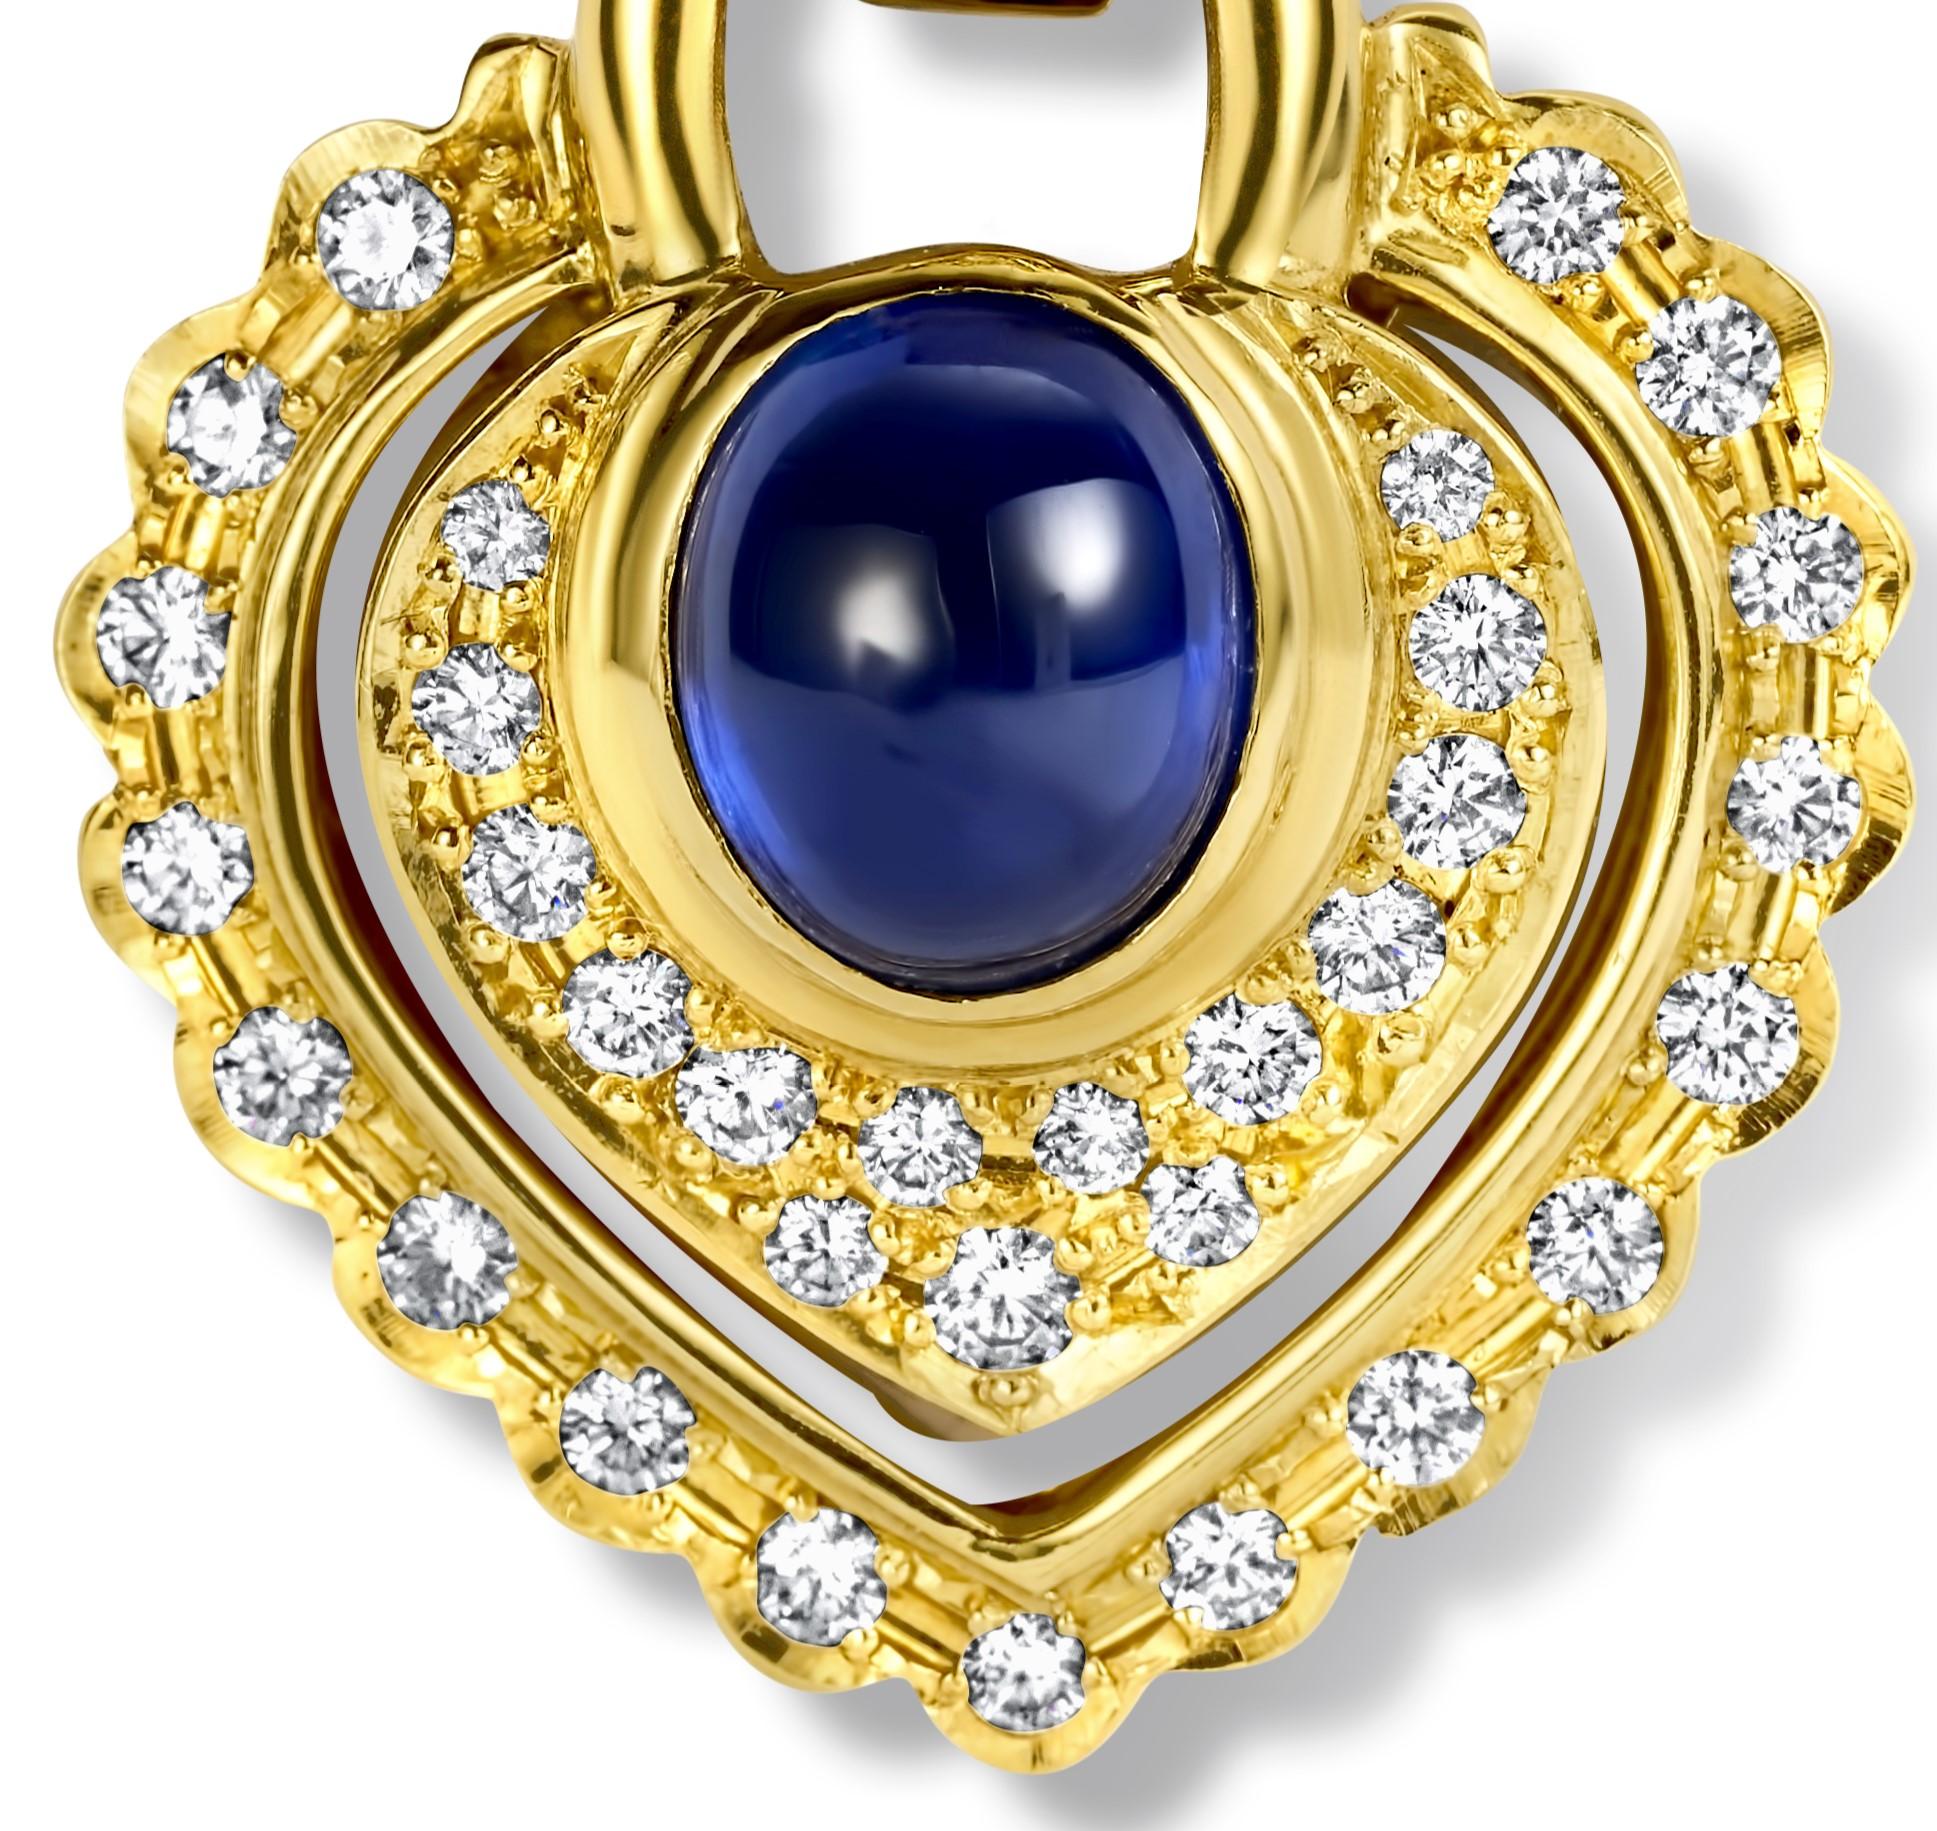 Women's or Men's 18kt. Yellow Gold Necklace, With Heart Shape Pendant & 2.89ct. Cabochon Sapphire For Sale